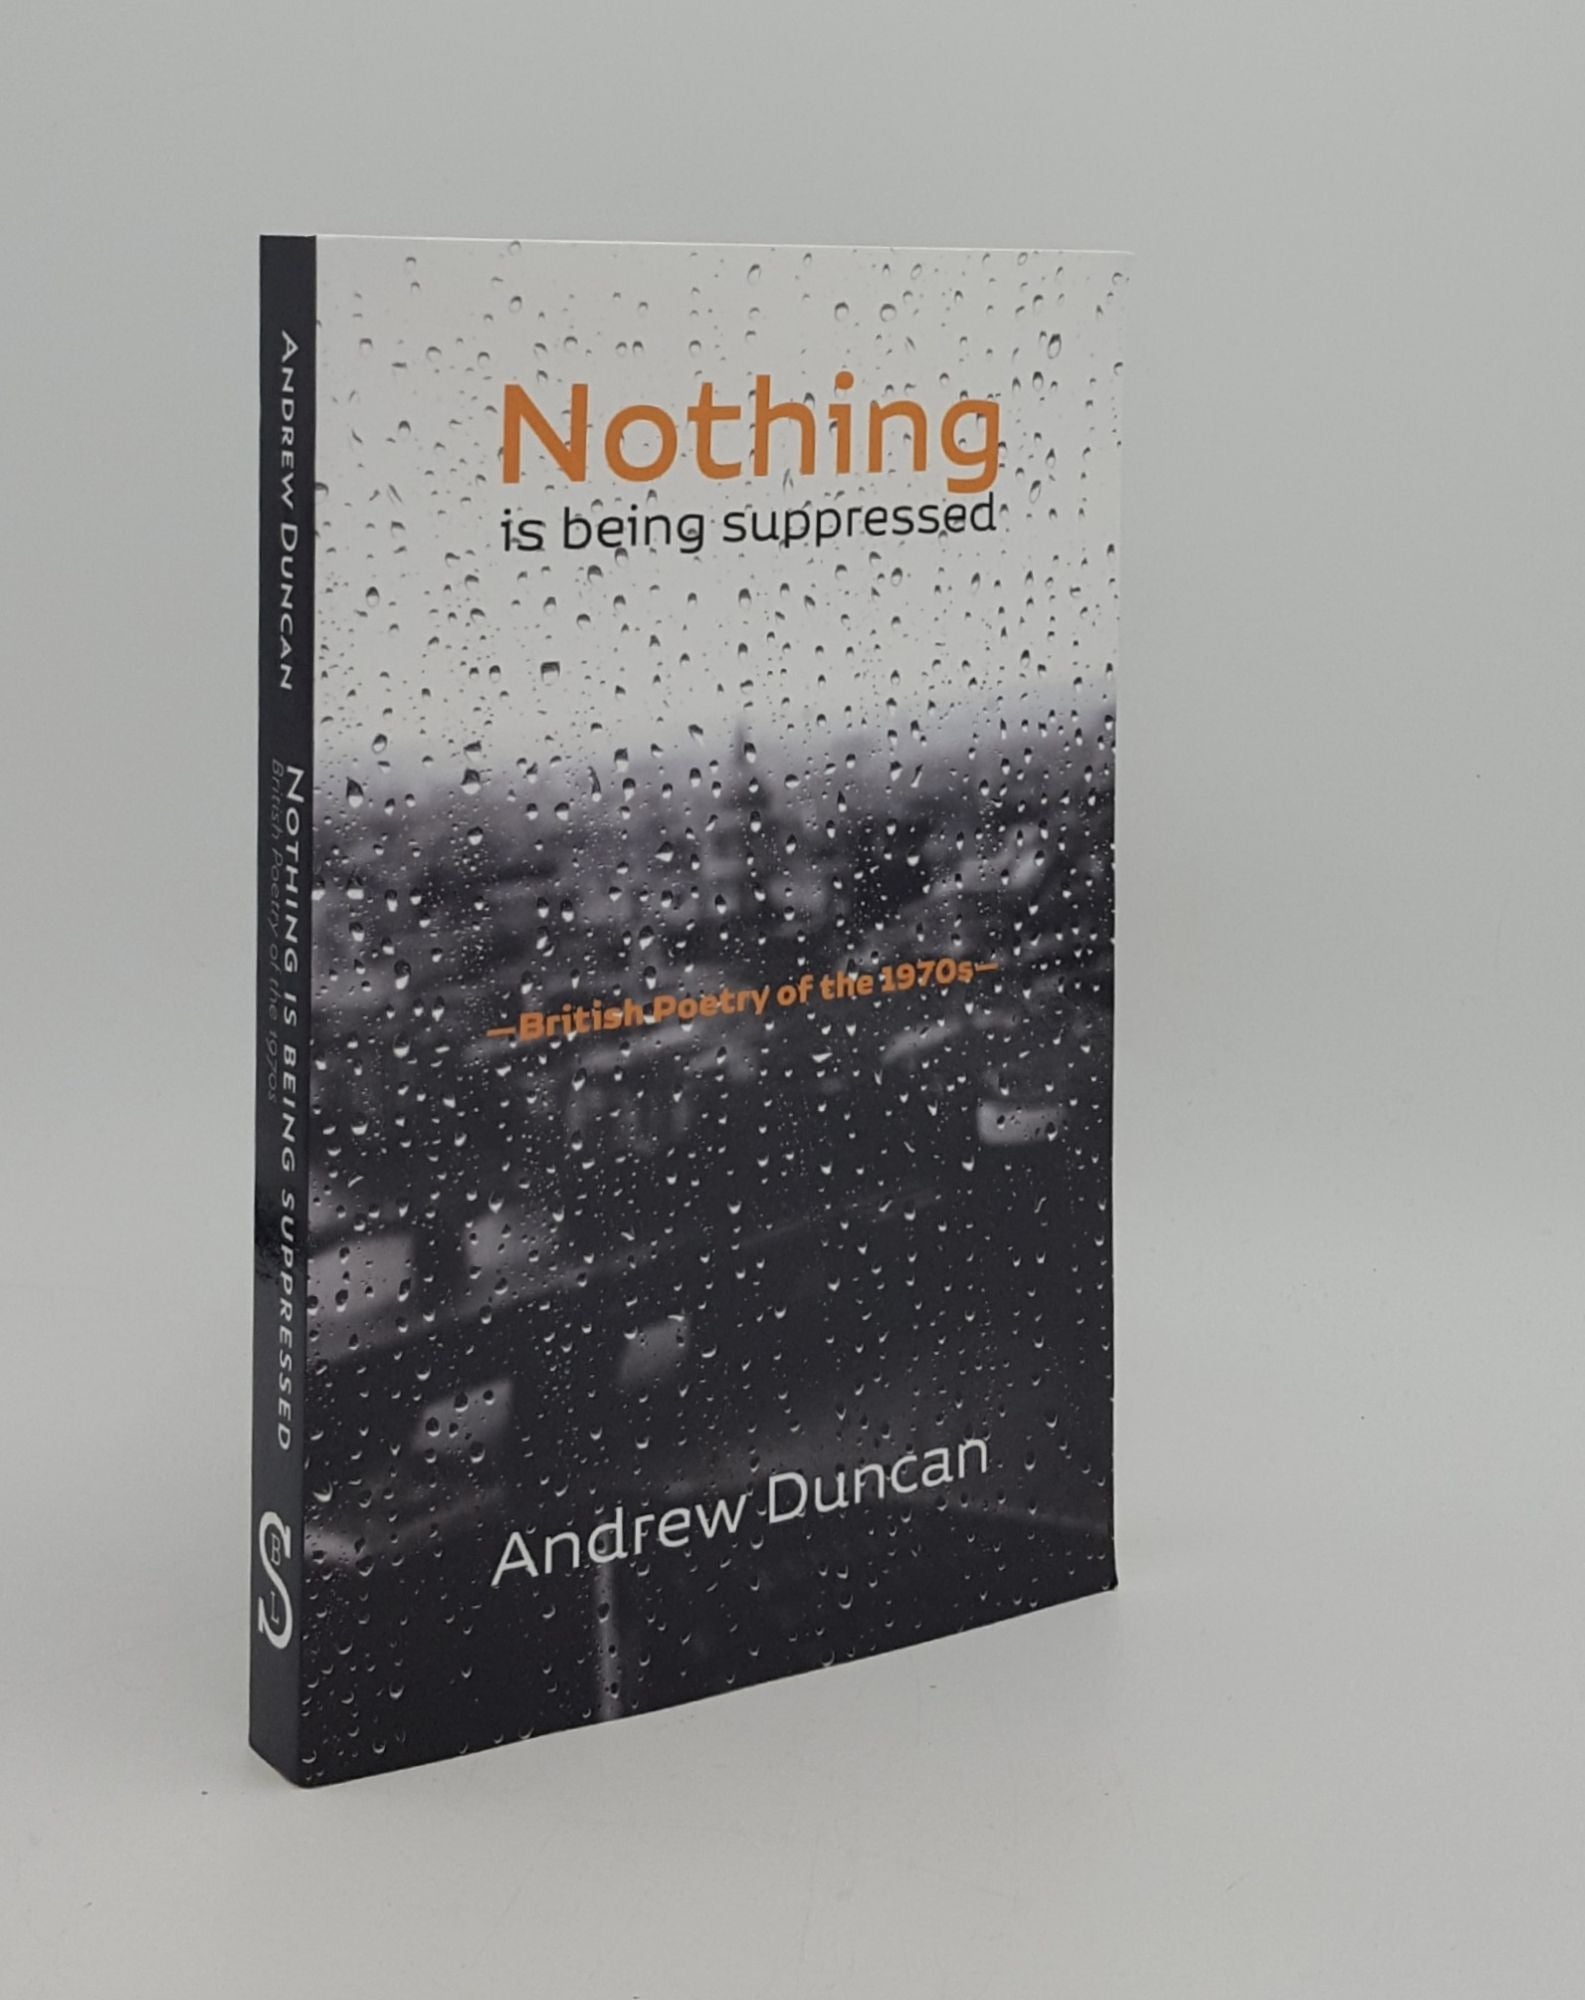 DUNCAN Andrew - Nothing Is Being Suppressed British Poetry of the 1970s